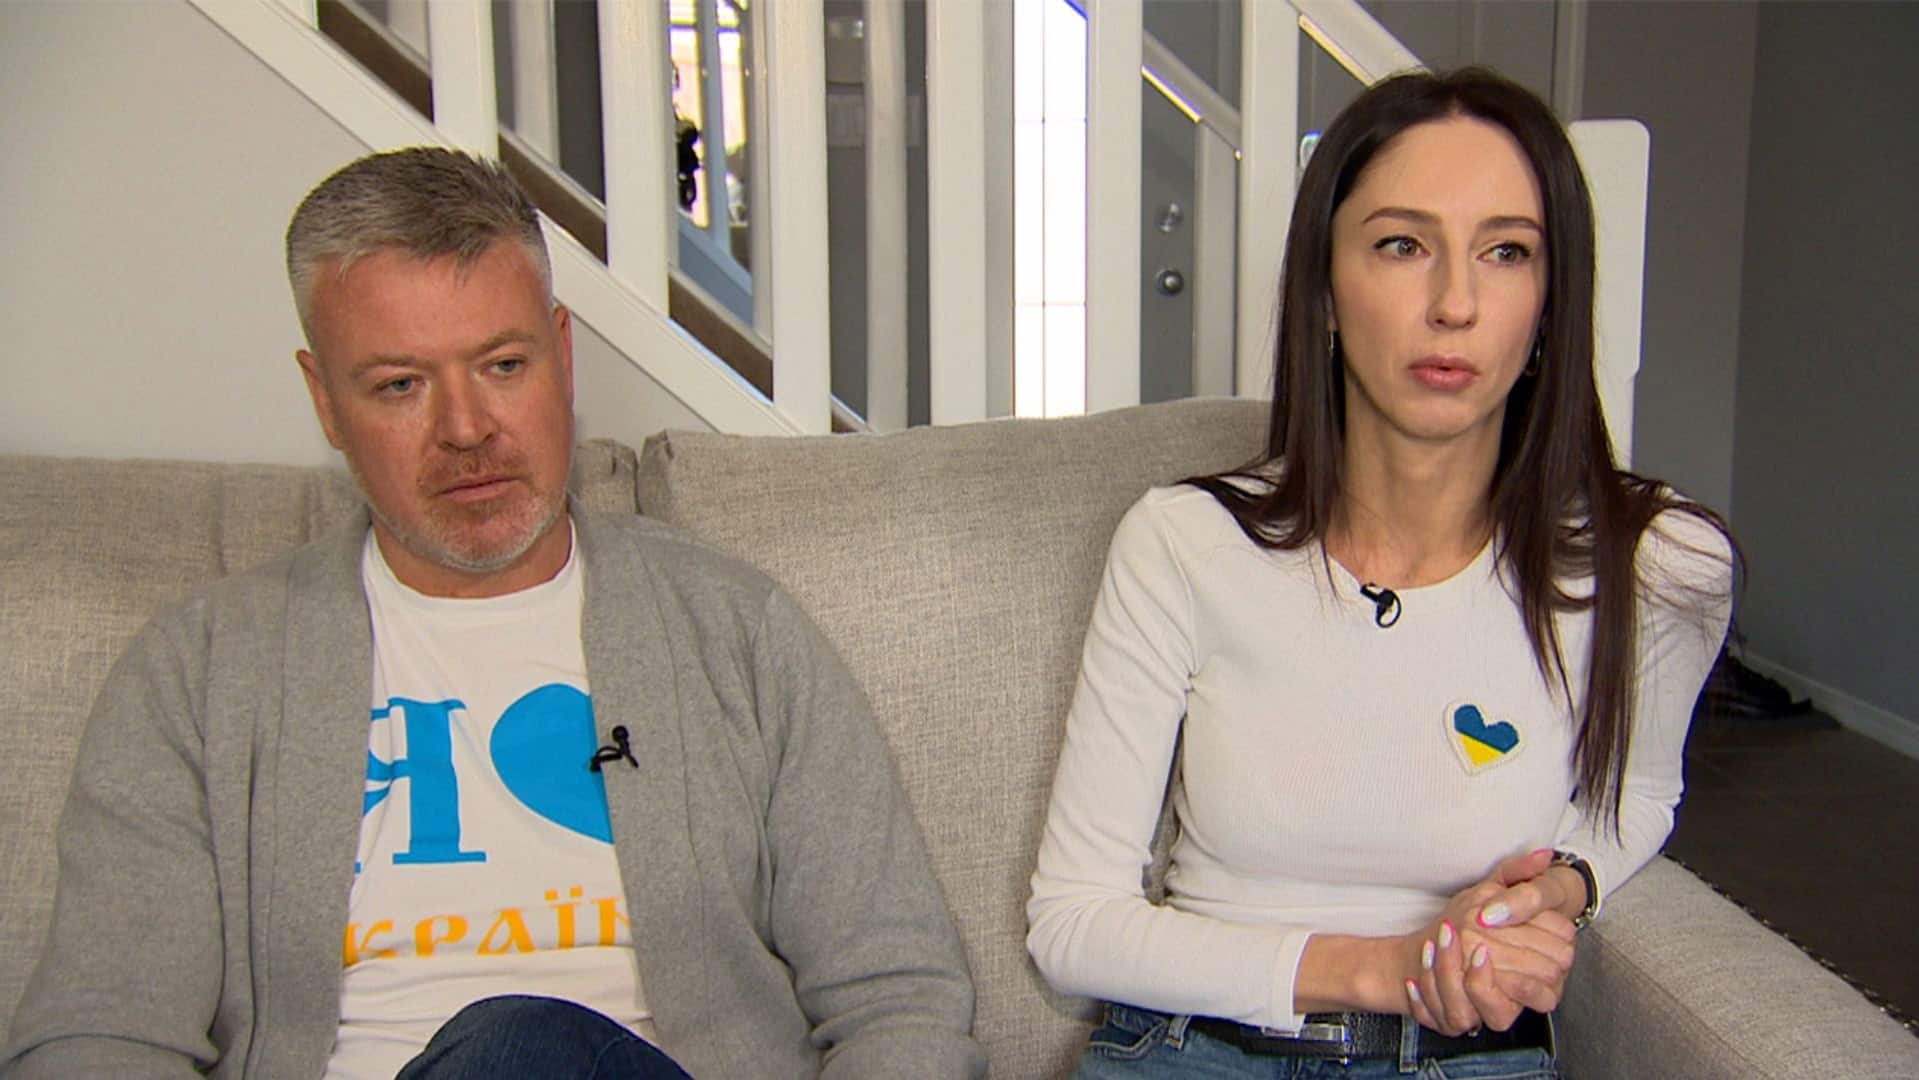 Ukrainian couple's Canadian visa was supposed to take 2 weeks. 3 months on, they're still waiting